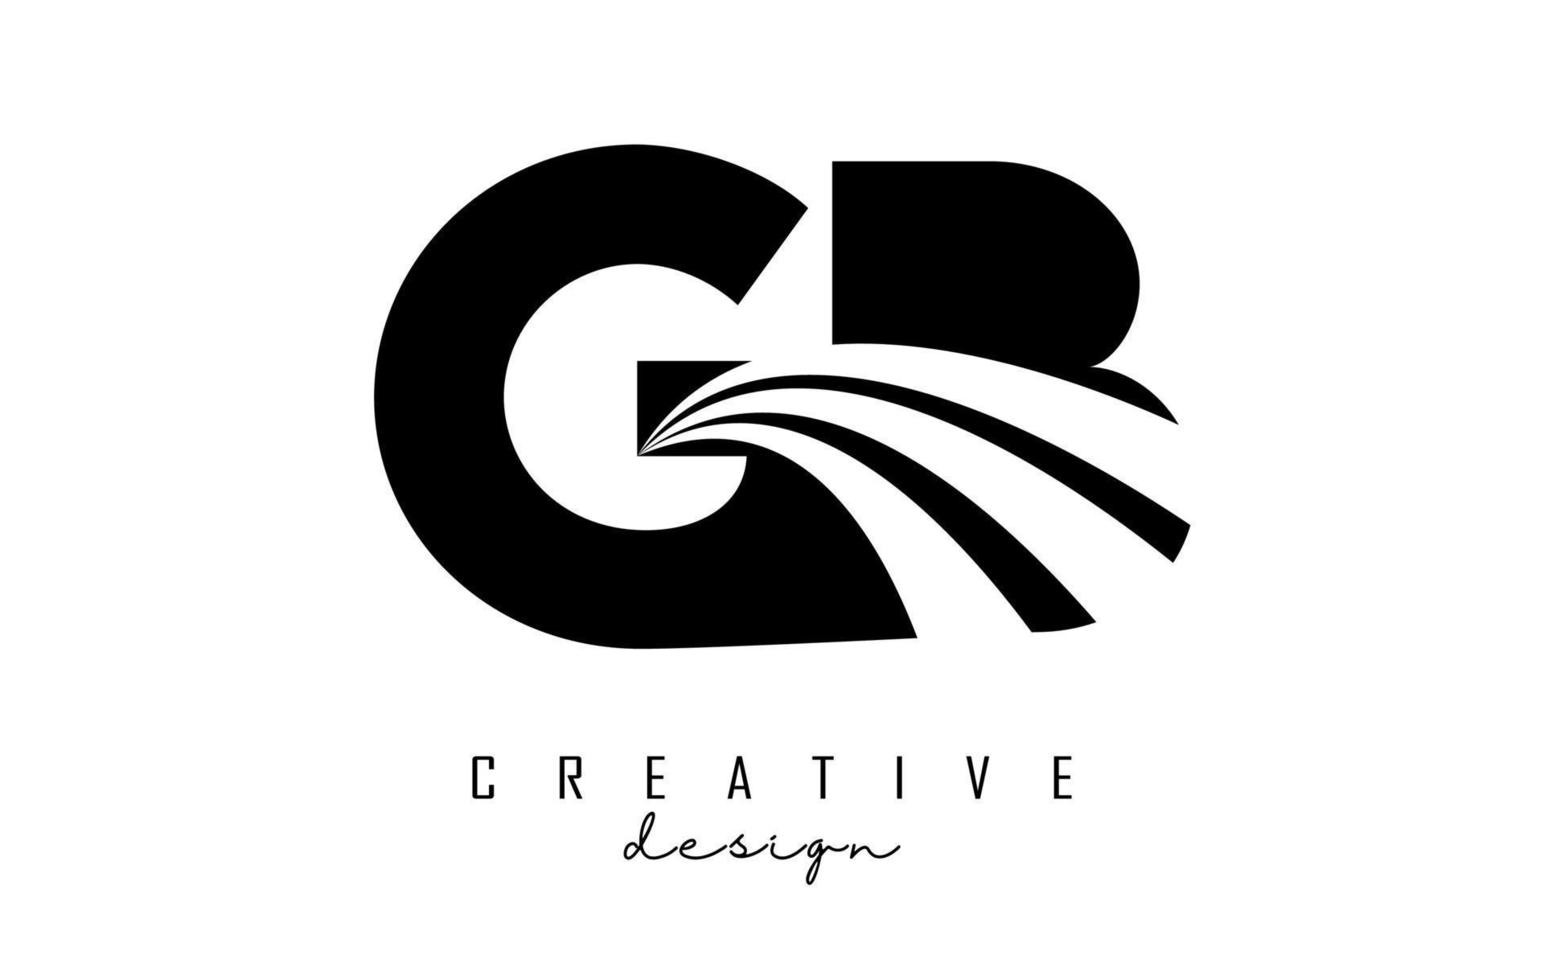 Creative black letters GB g b logo with leading lines and road concept design. Letters with geometric design. vector